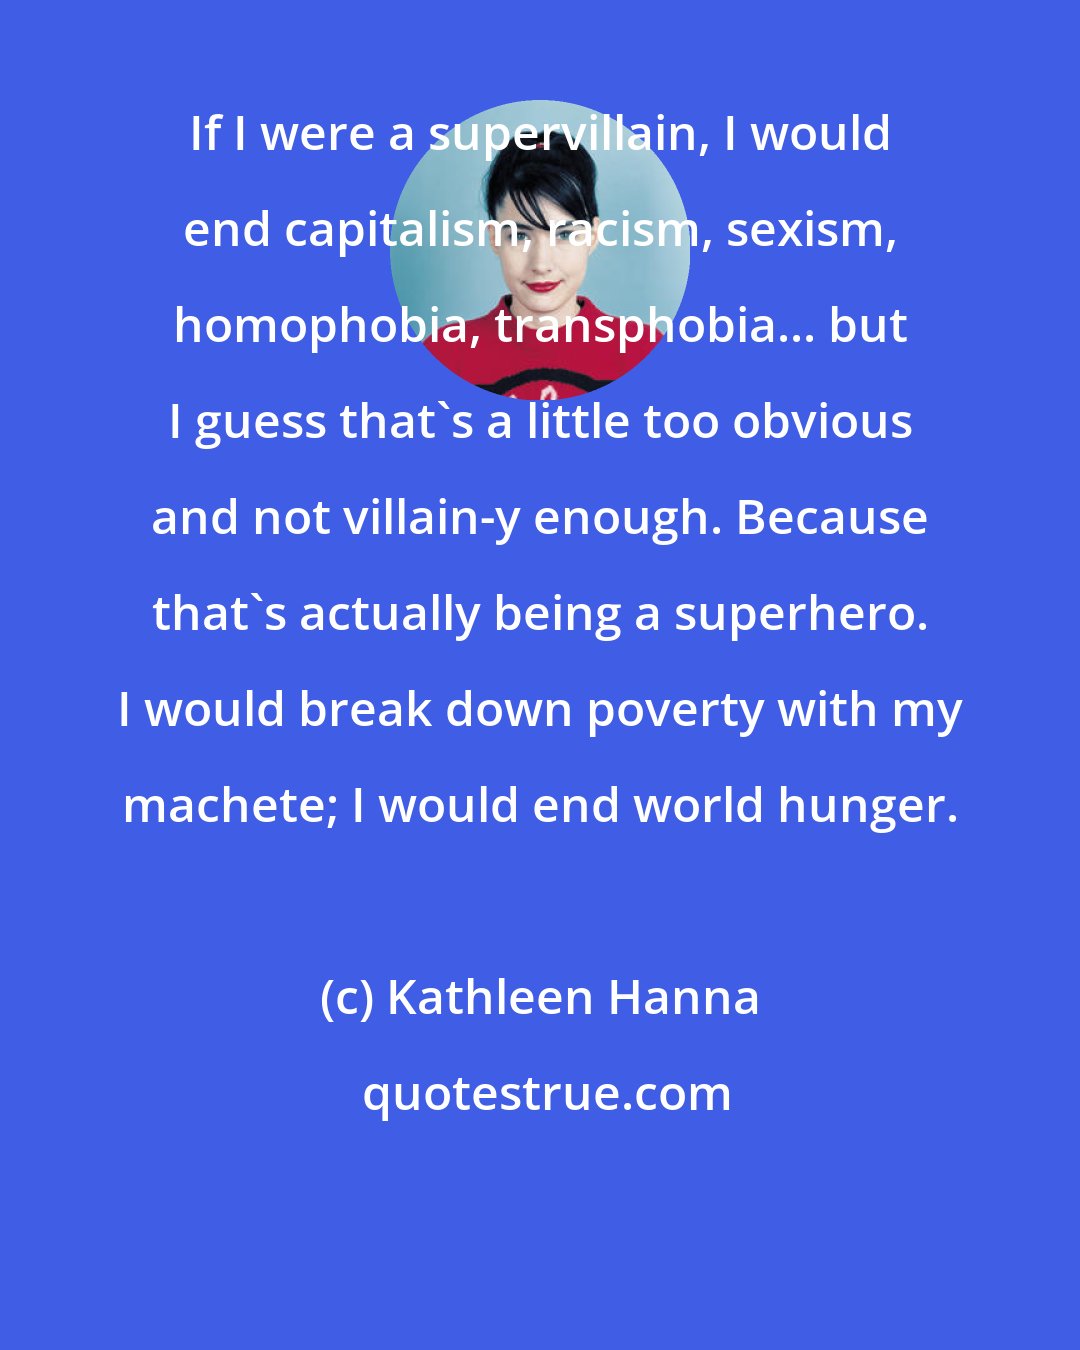 Kathleen Hanna: If I were a supervillain, I would end capitalism, racism, sexism, homophobia, transphobia... but I guess that's a little too obvious and not villain-y enough. Because that's actually being a superhero. I would break down poverty with my machete; I would end world hunger.